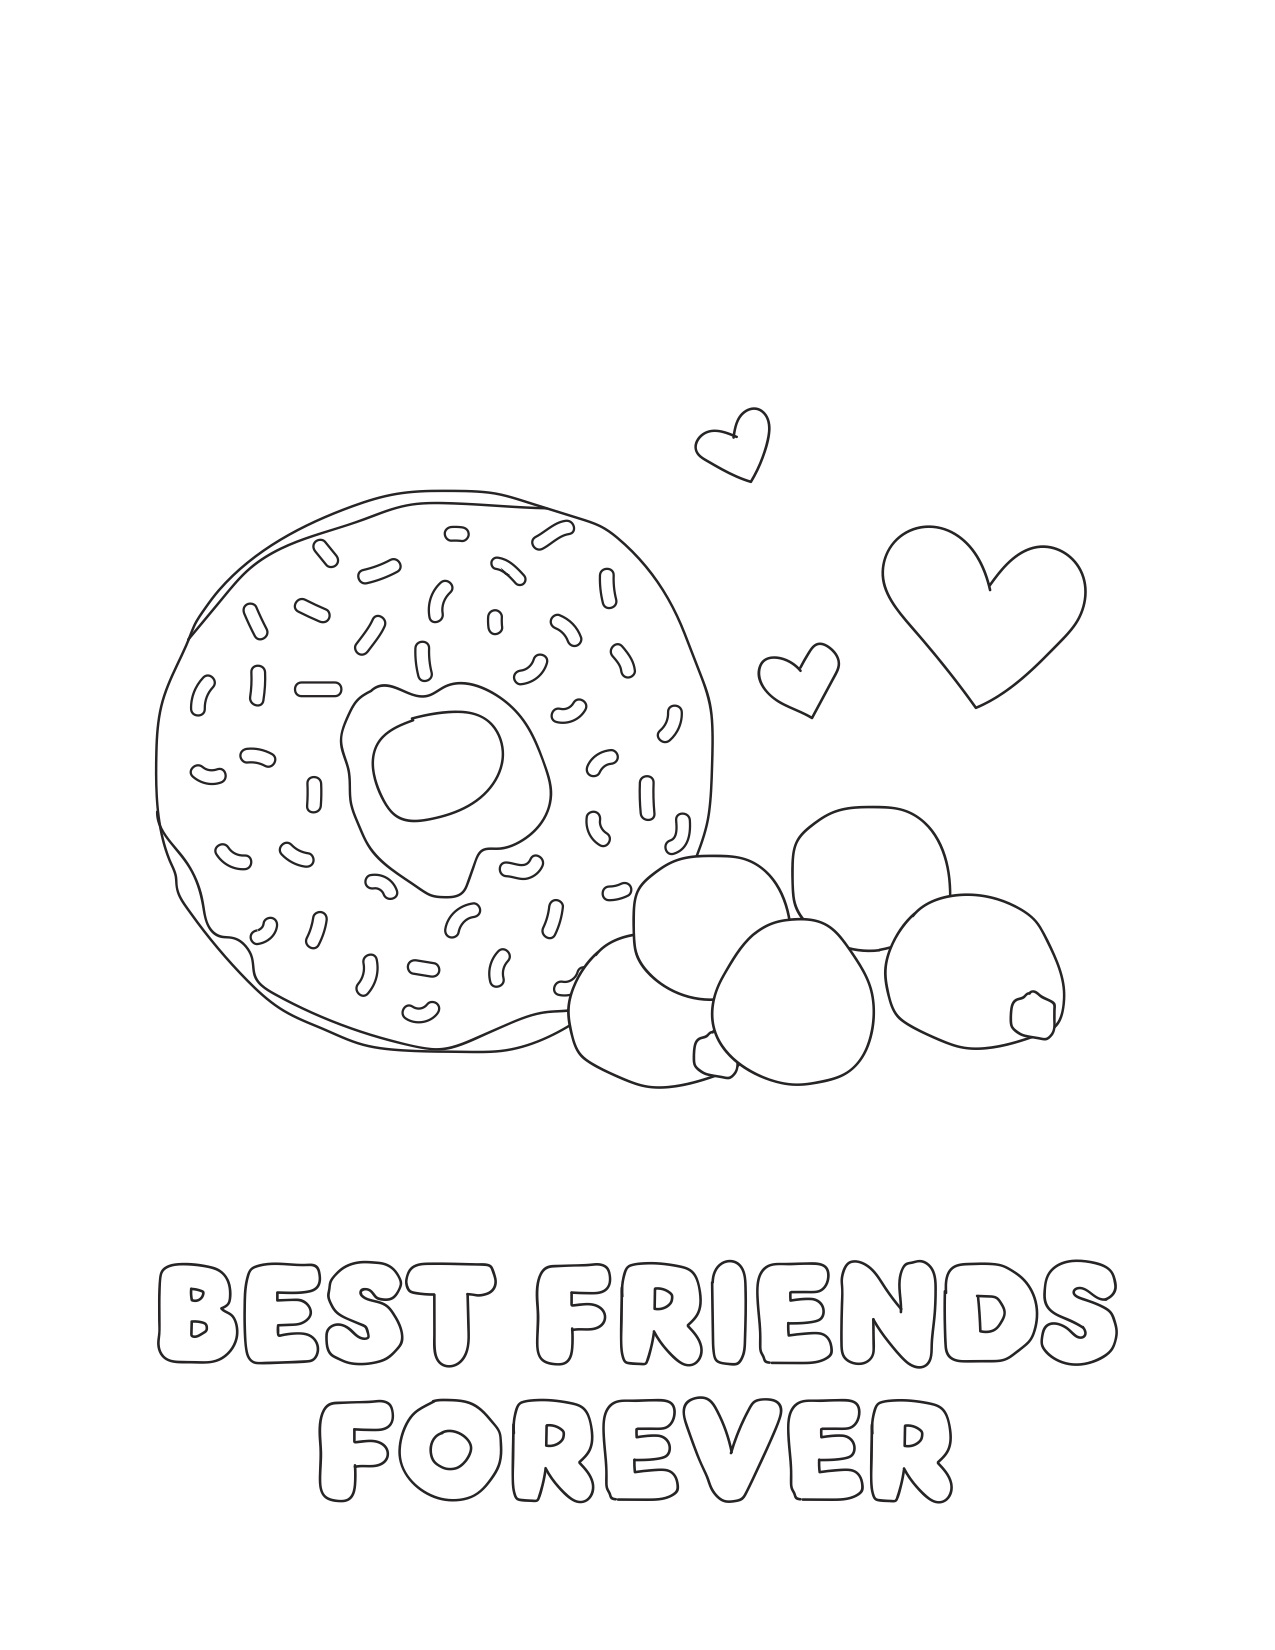 Treat Your BFF This National Best Friend Day | Dunkin'